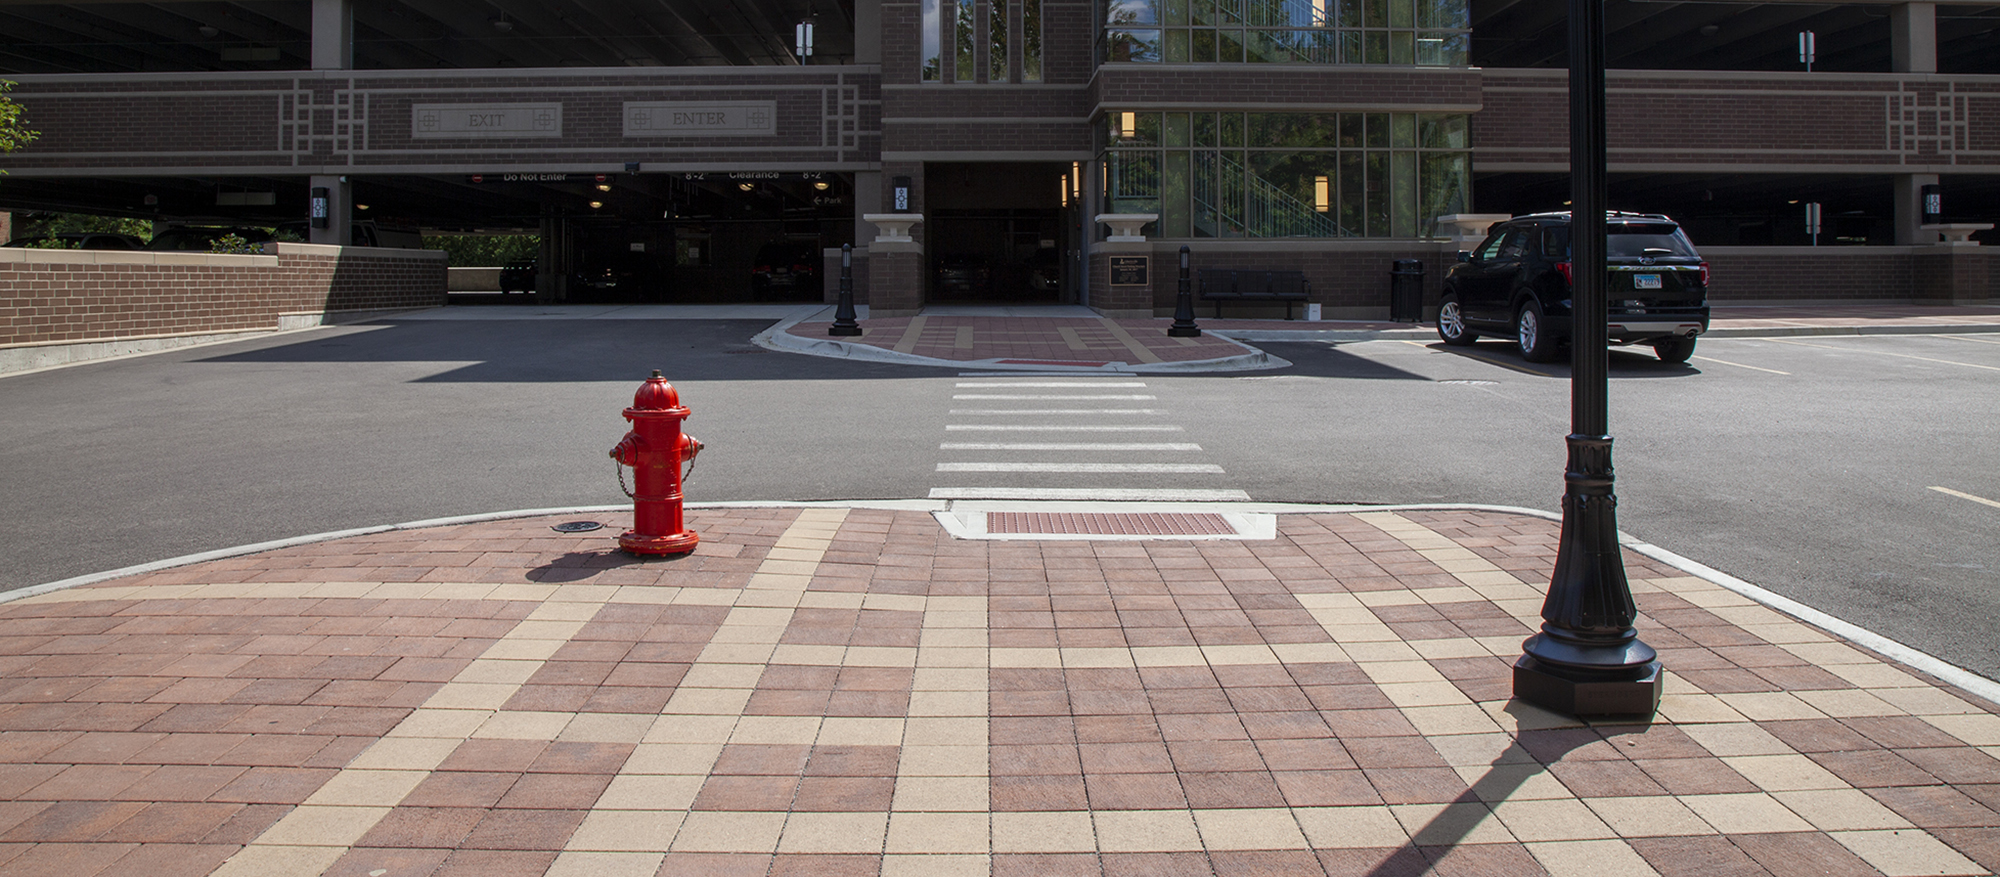 A car is  parked in front of a parking garage in an outdoor lot with raised curbs of red and beige Eco-Priora pavers, lights and a hydrant.